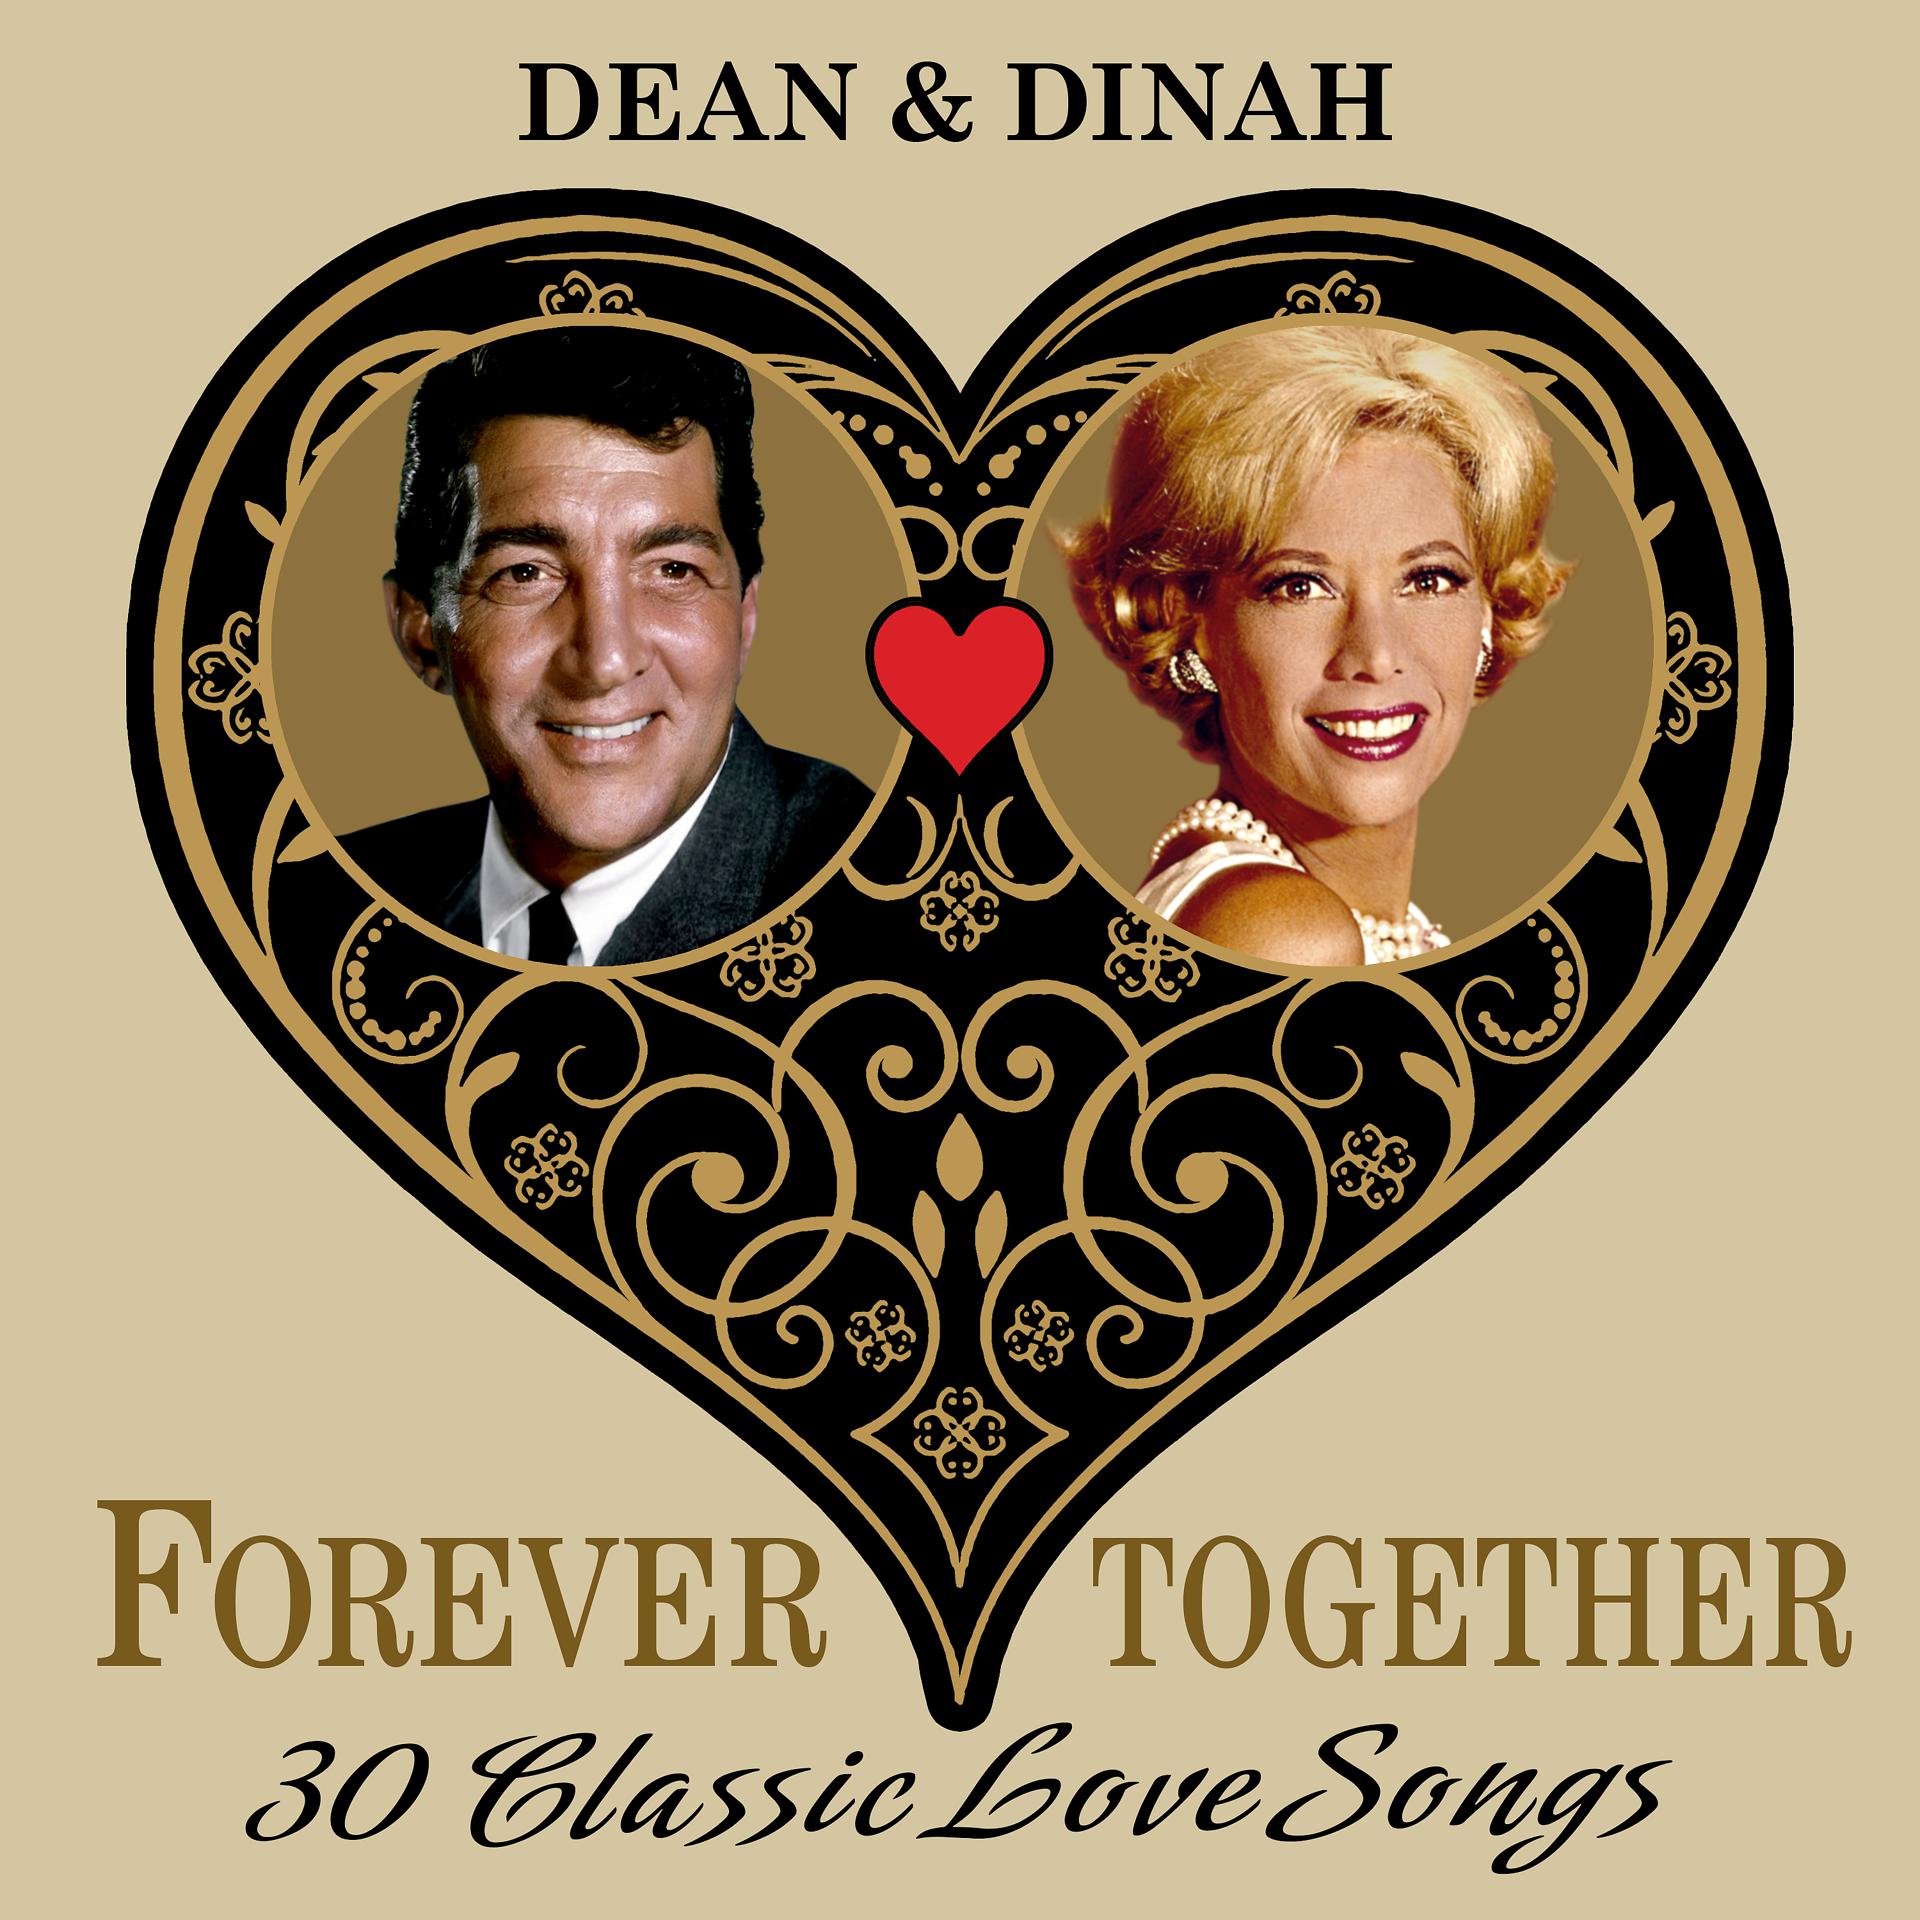 Постер альбома Dean & Dinah (Forever Together) 30 Classic Love Songs